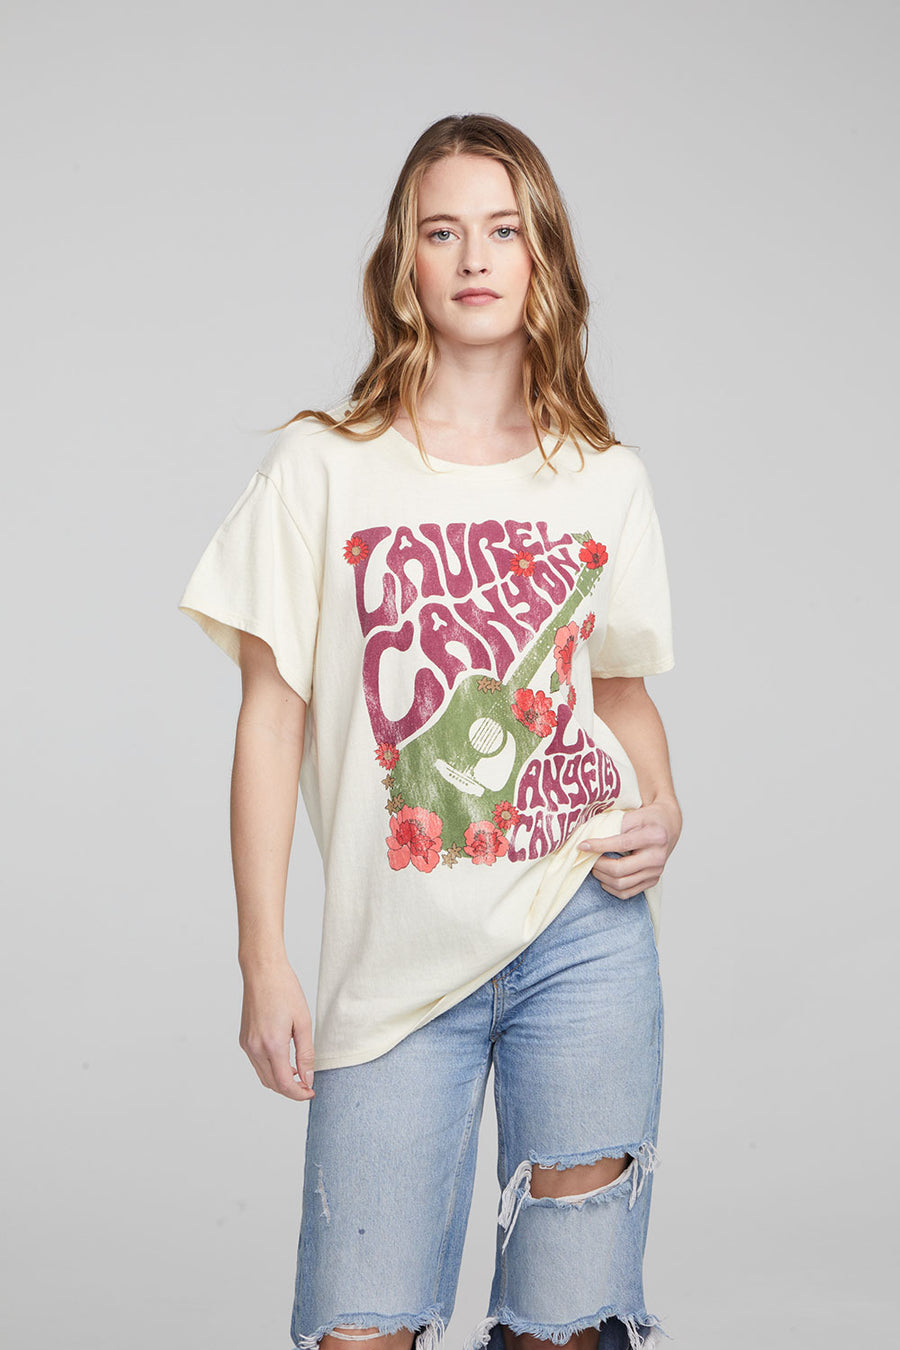 Laurel Canyon Poster WOMENS chaserbrand